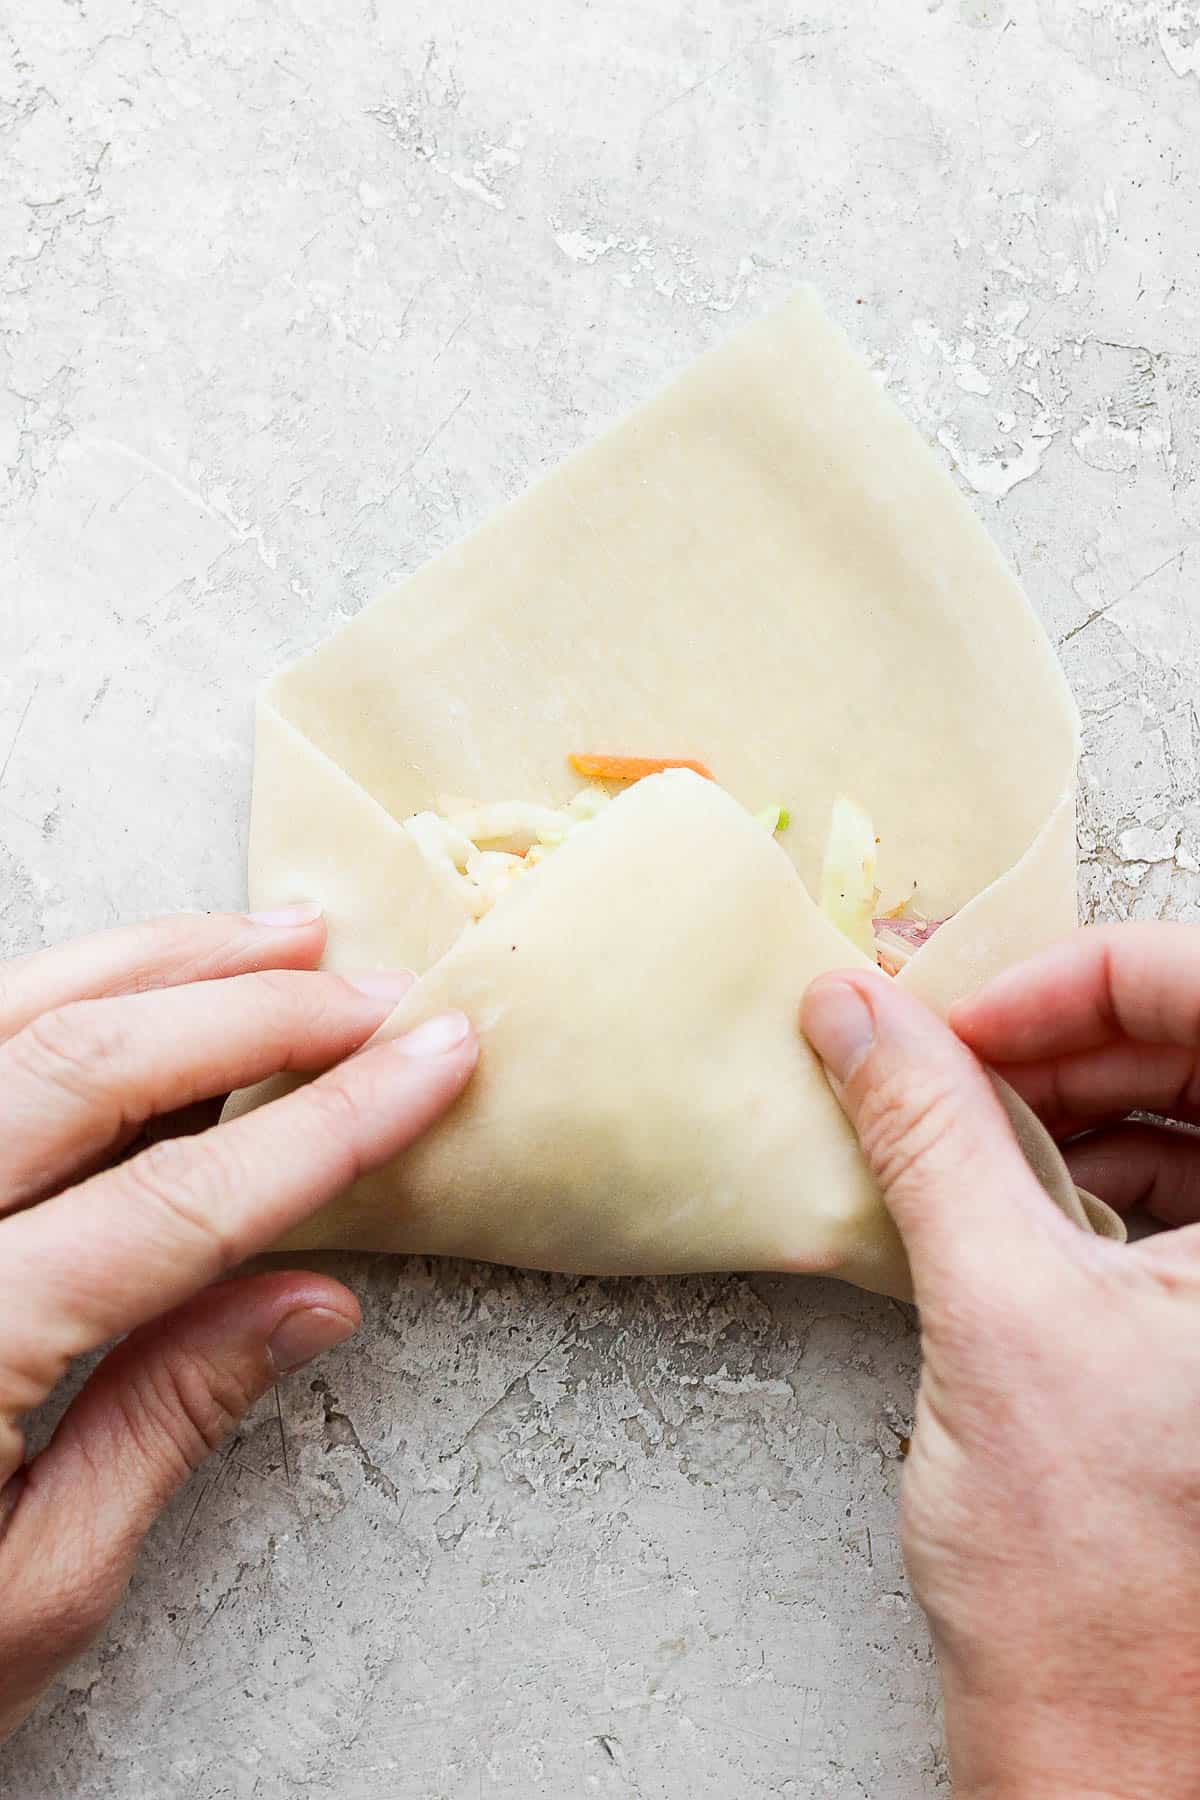 The corn of the egg roll wrapper folded over the filling.